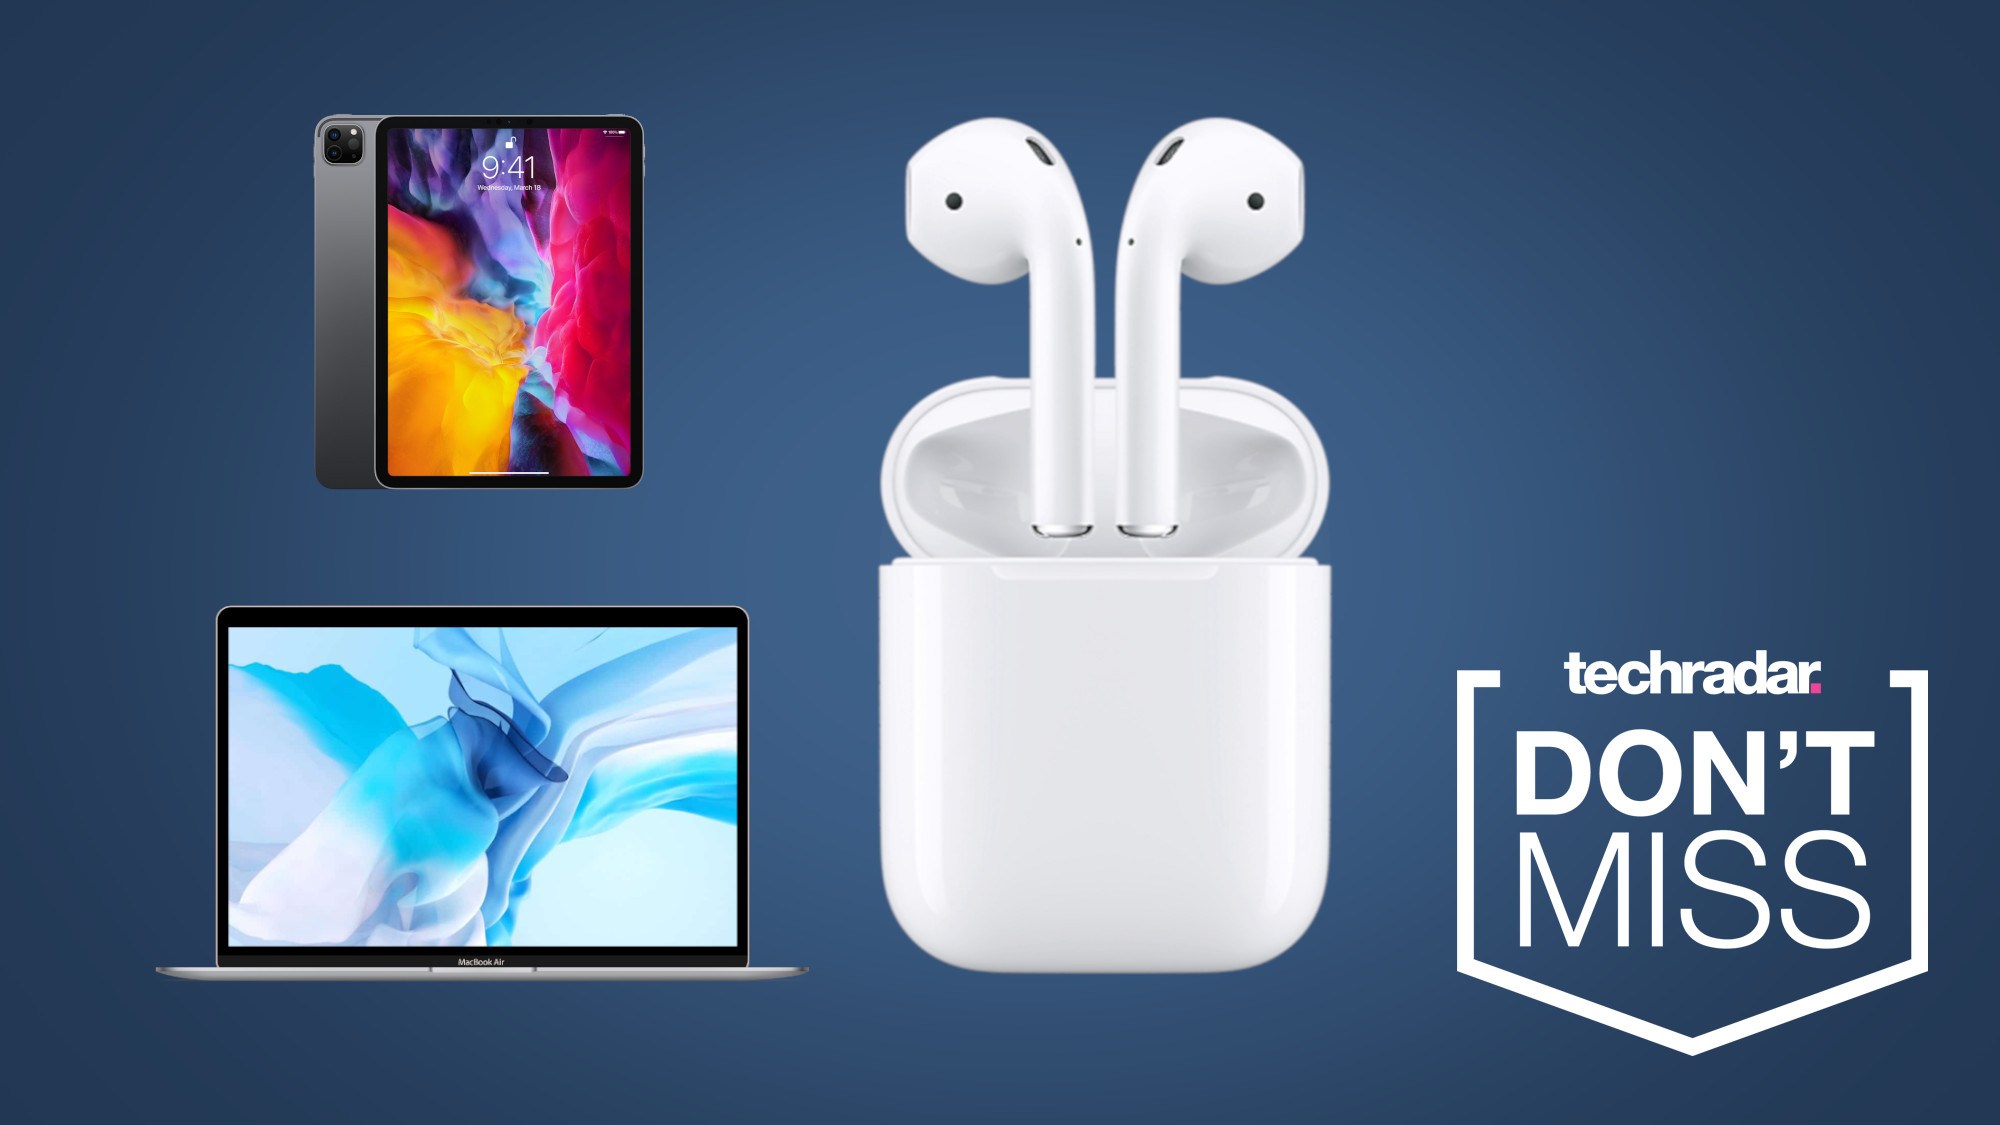 The Apple back to school event is now worldwide offering free AirPods